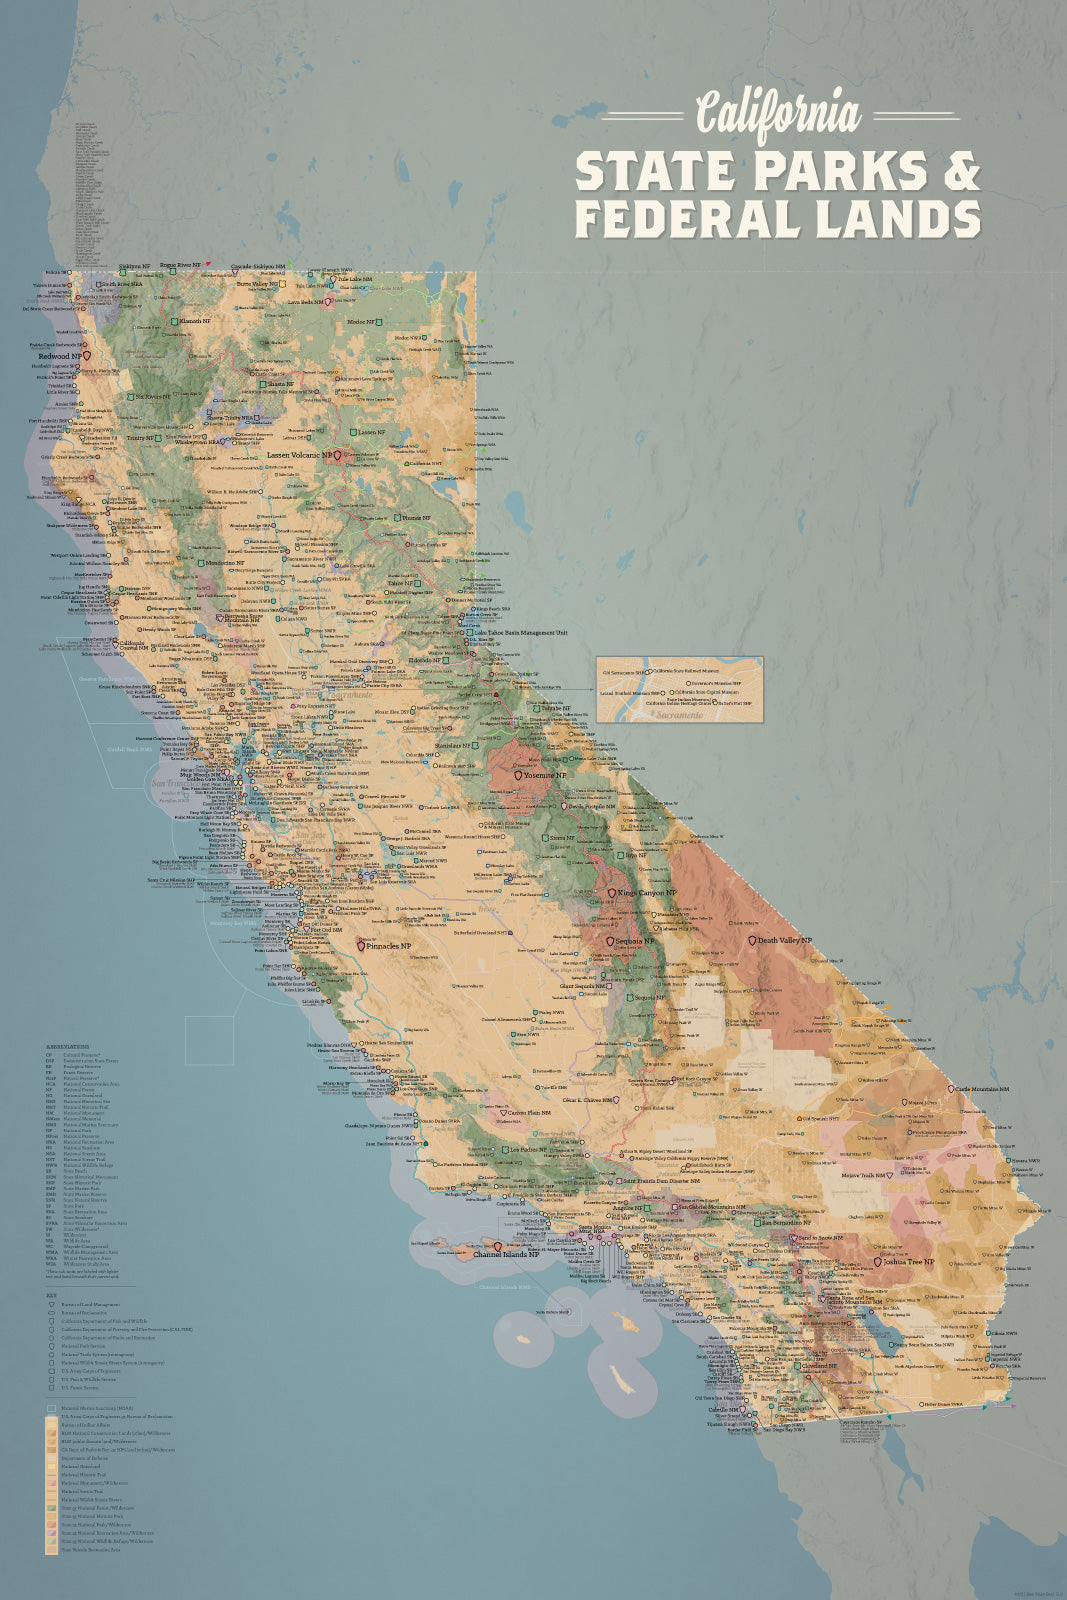 California State Parks & Federal Lands Map 24x36 Poster - Best Maps Ever